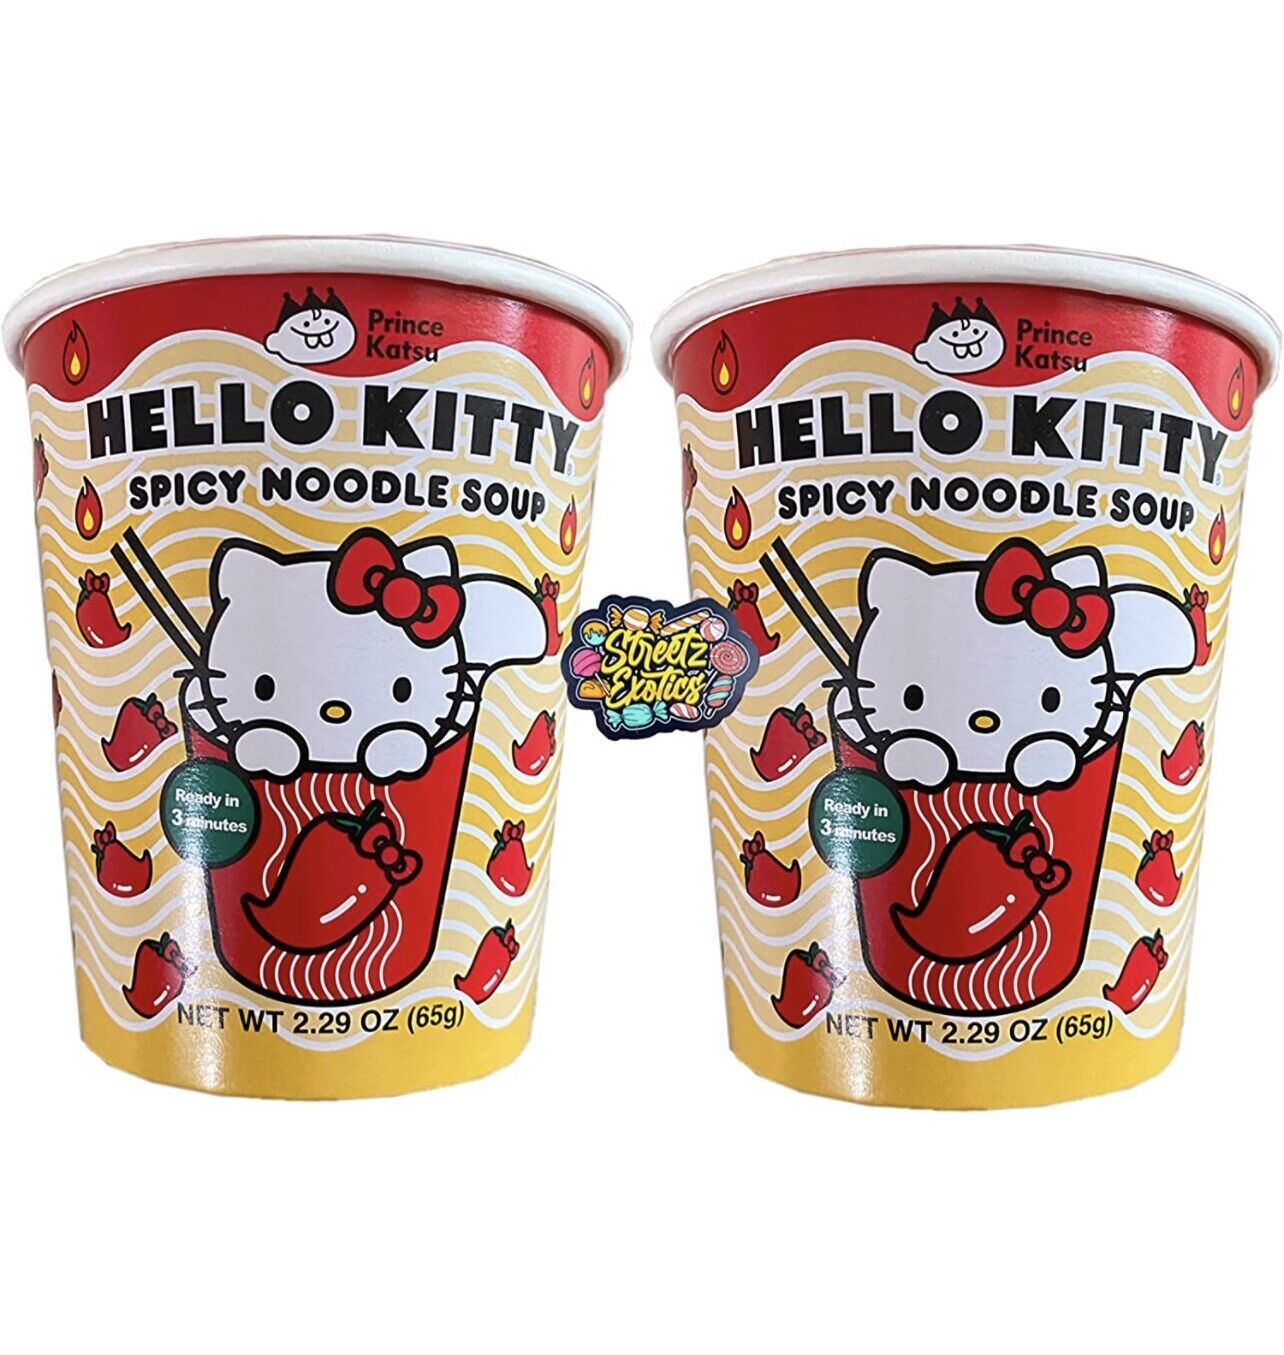 Hello Kitty Spicy Noodle Soup, Limited Edition 2.29 Oz (set Of 2)